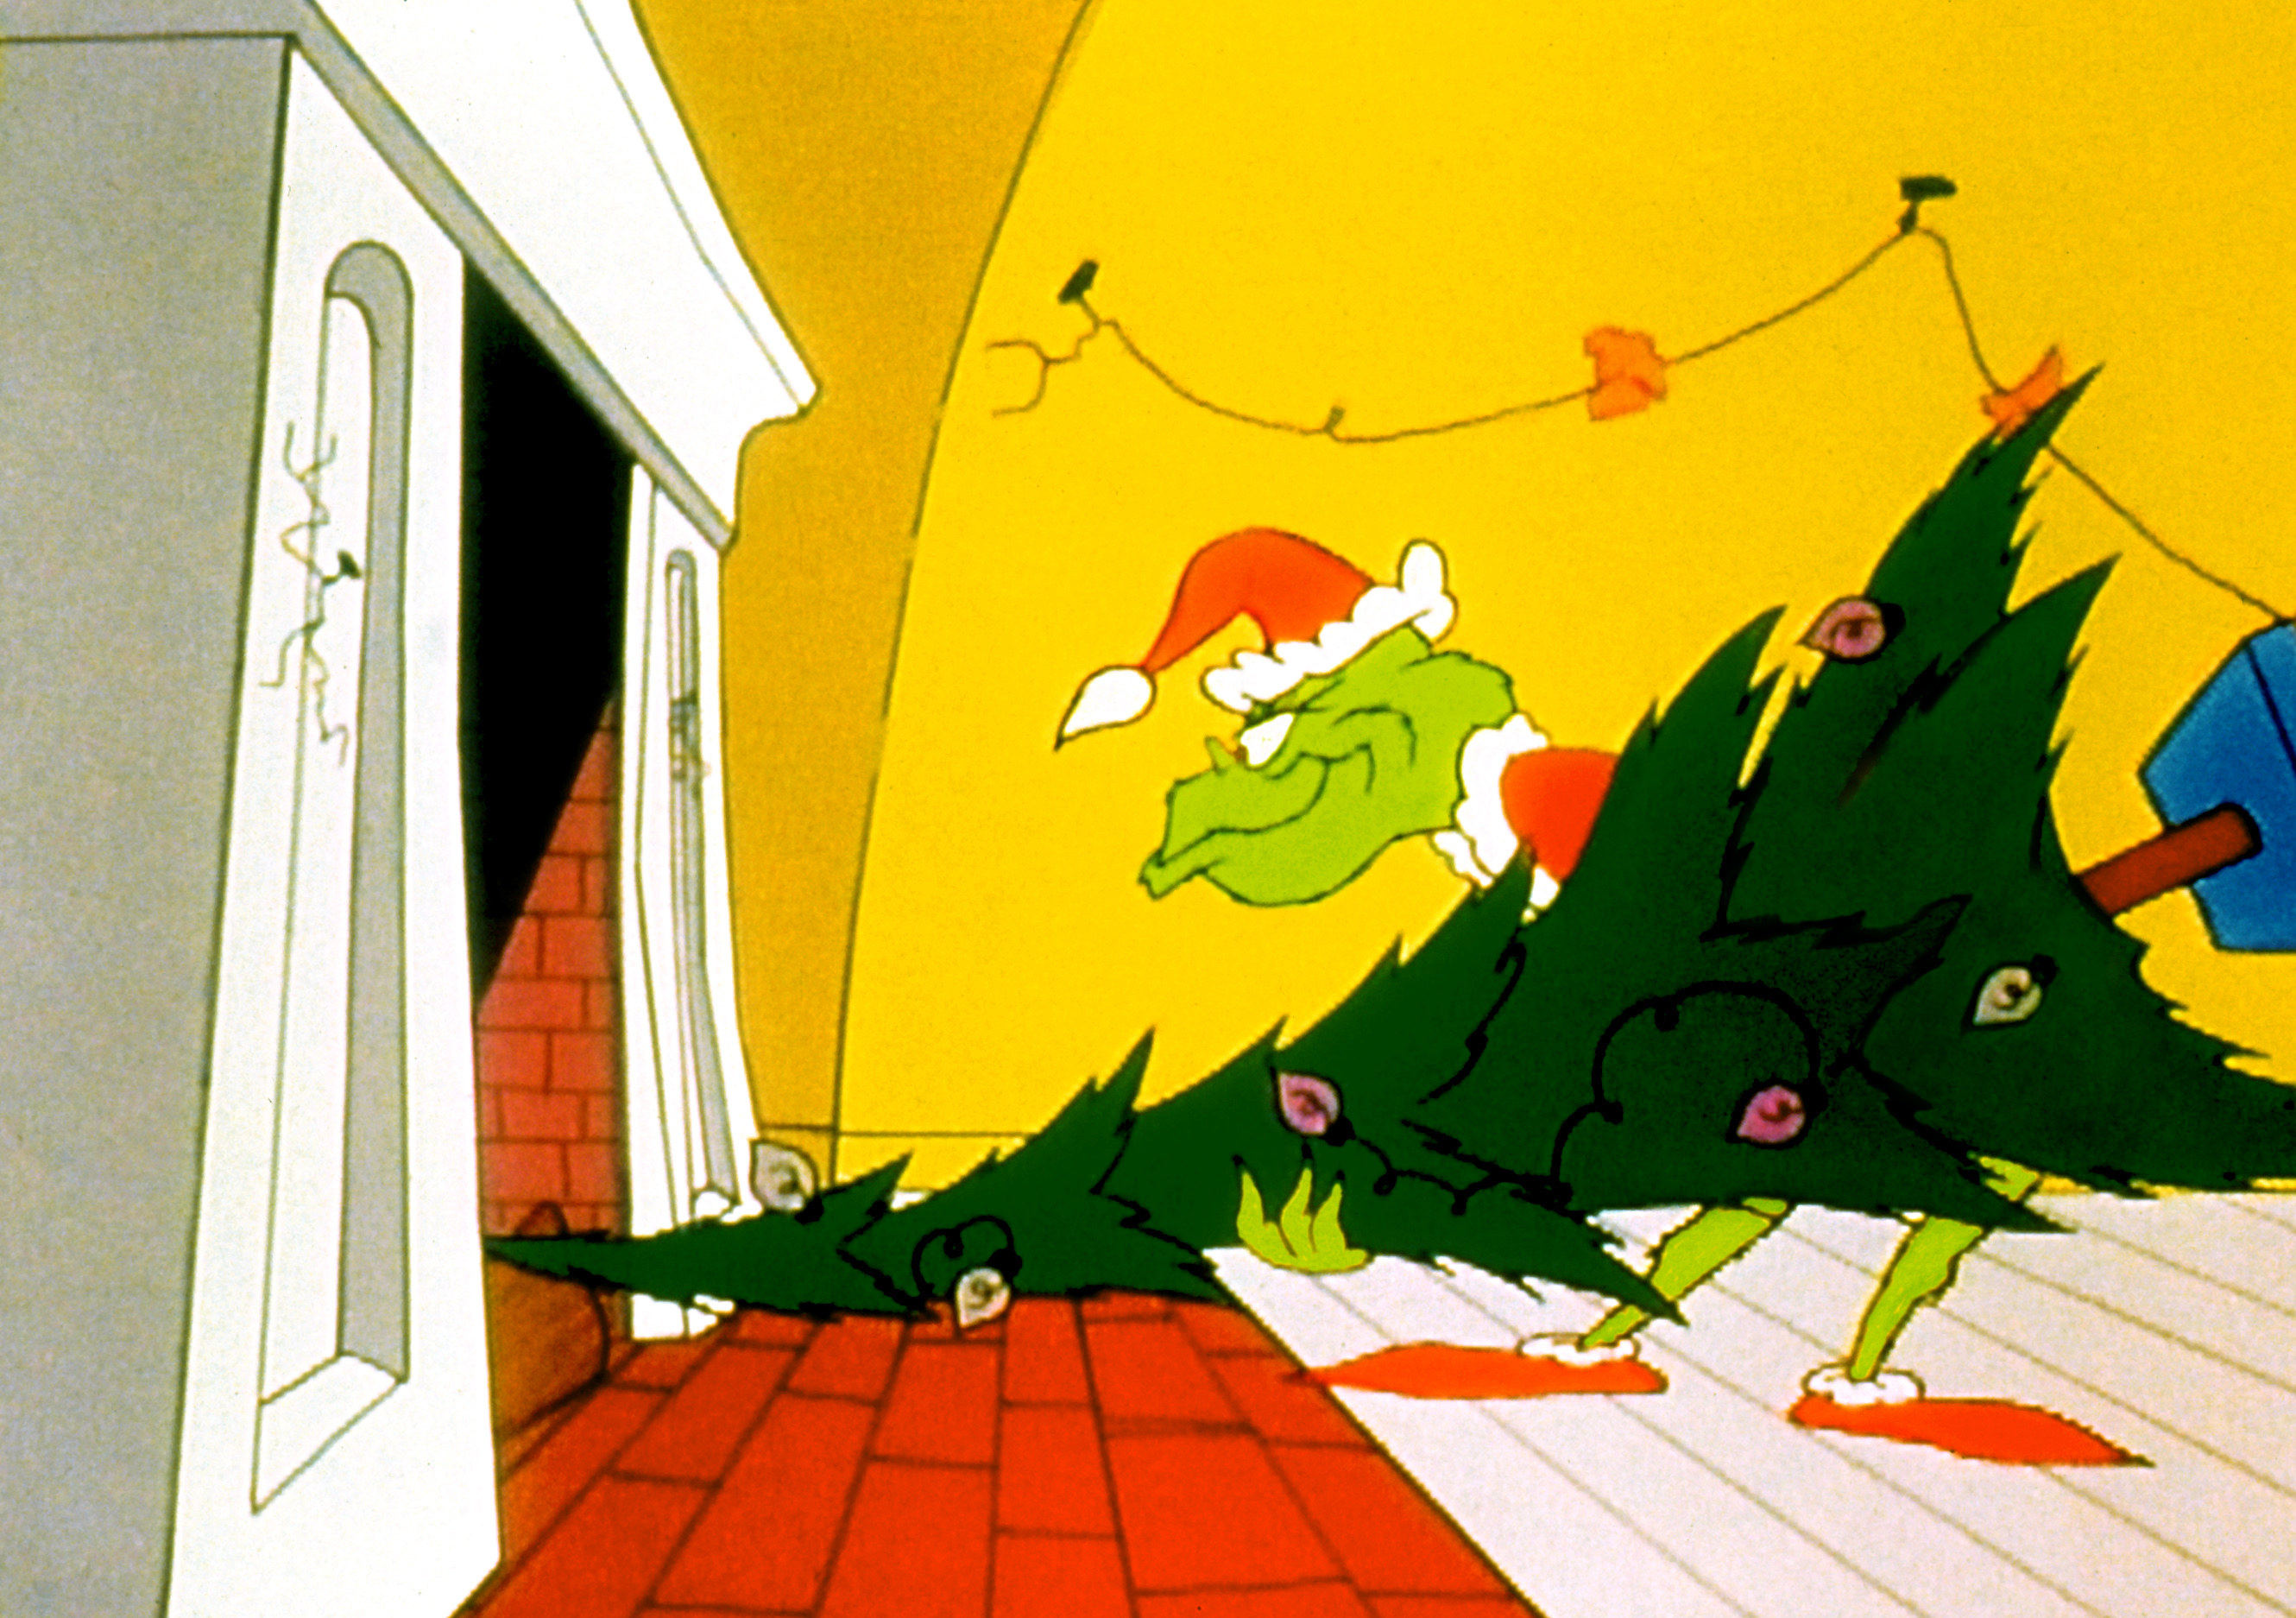 The Grinch stuffing a tree up a chimney.